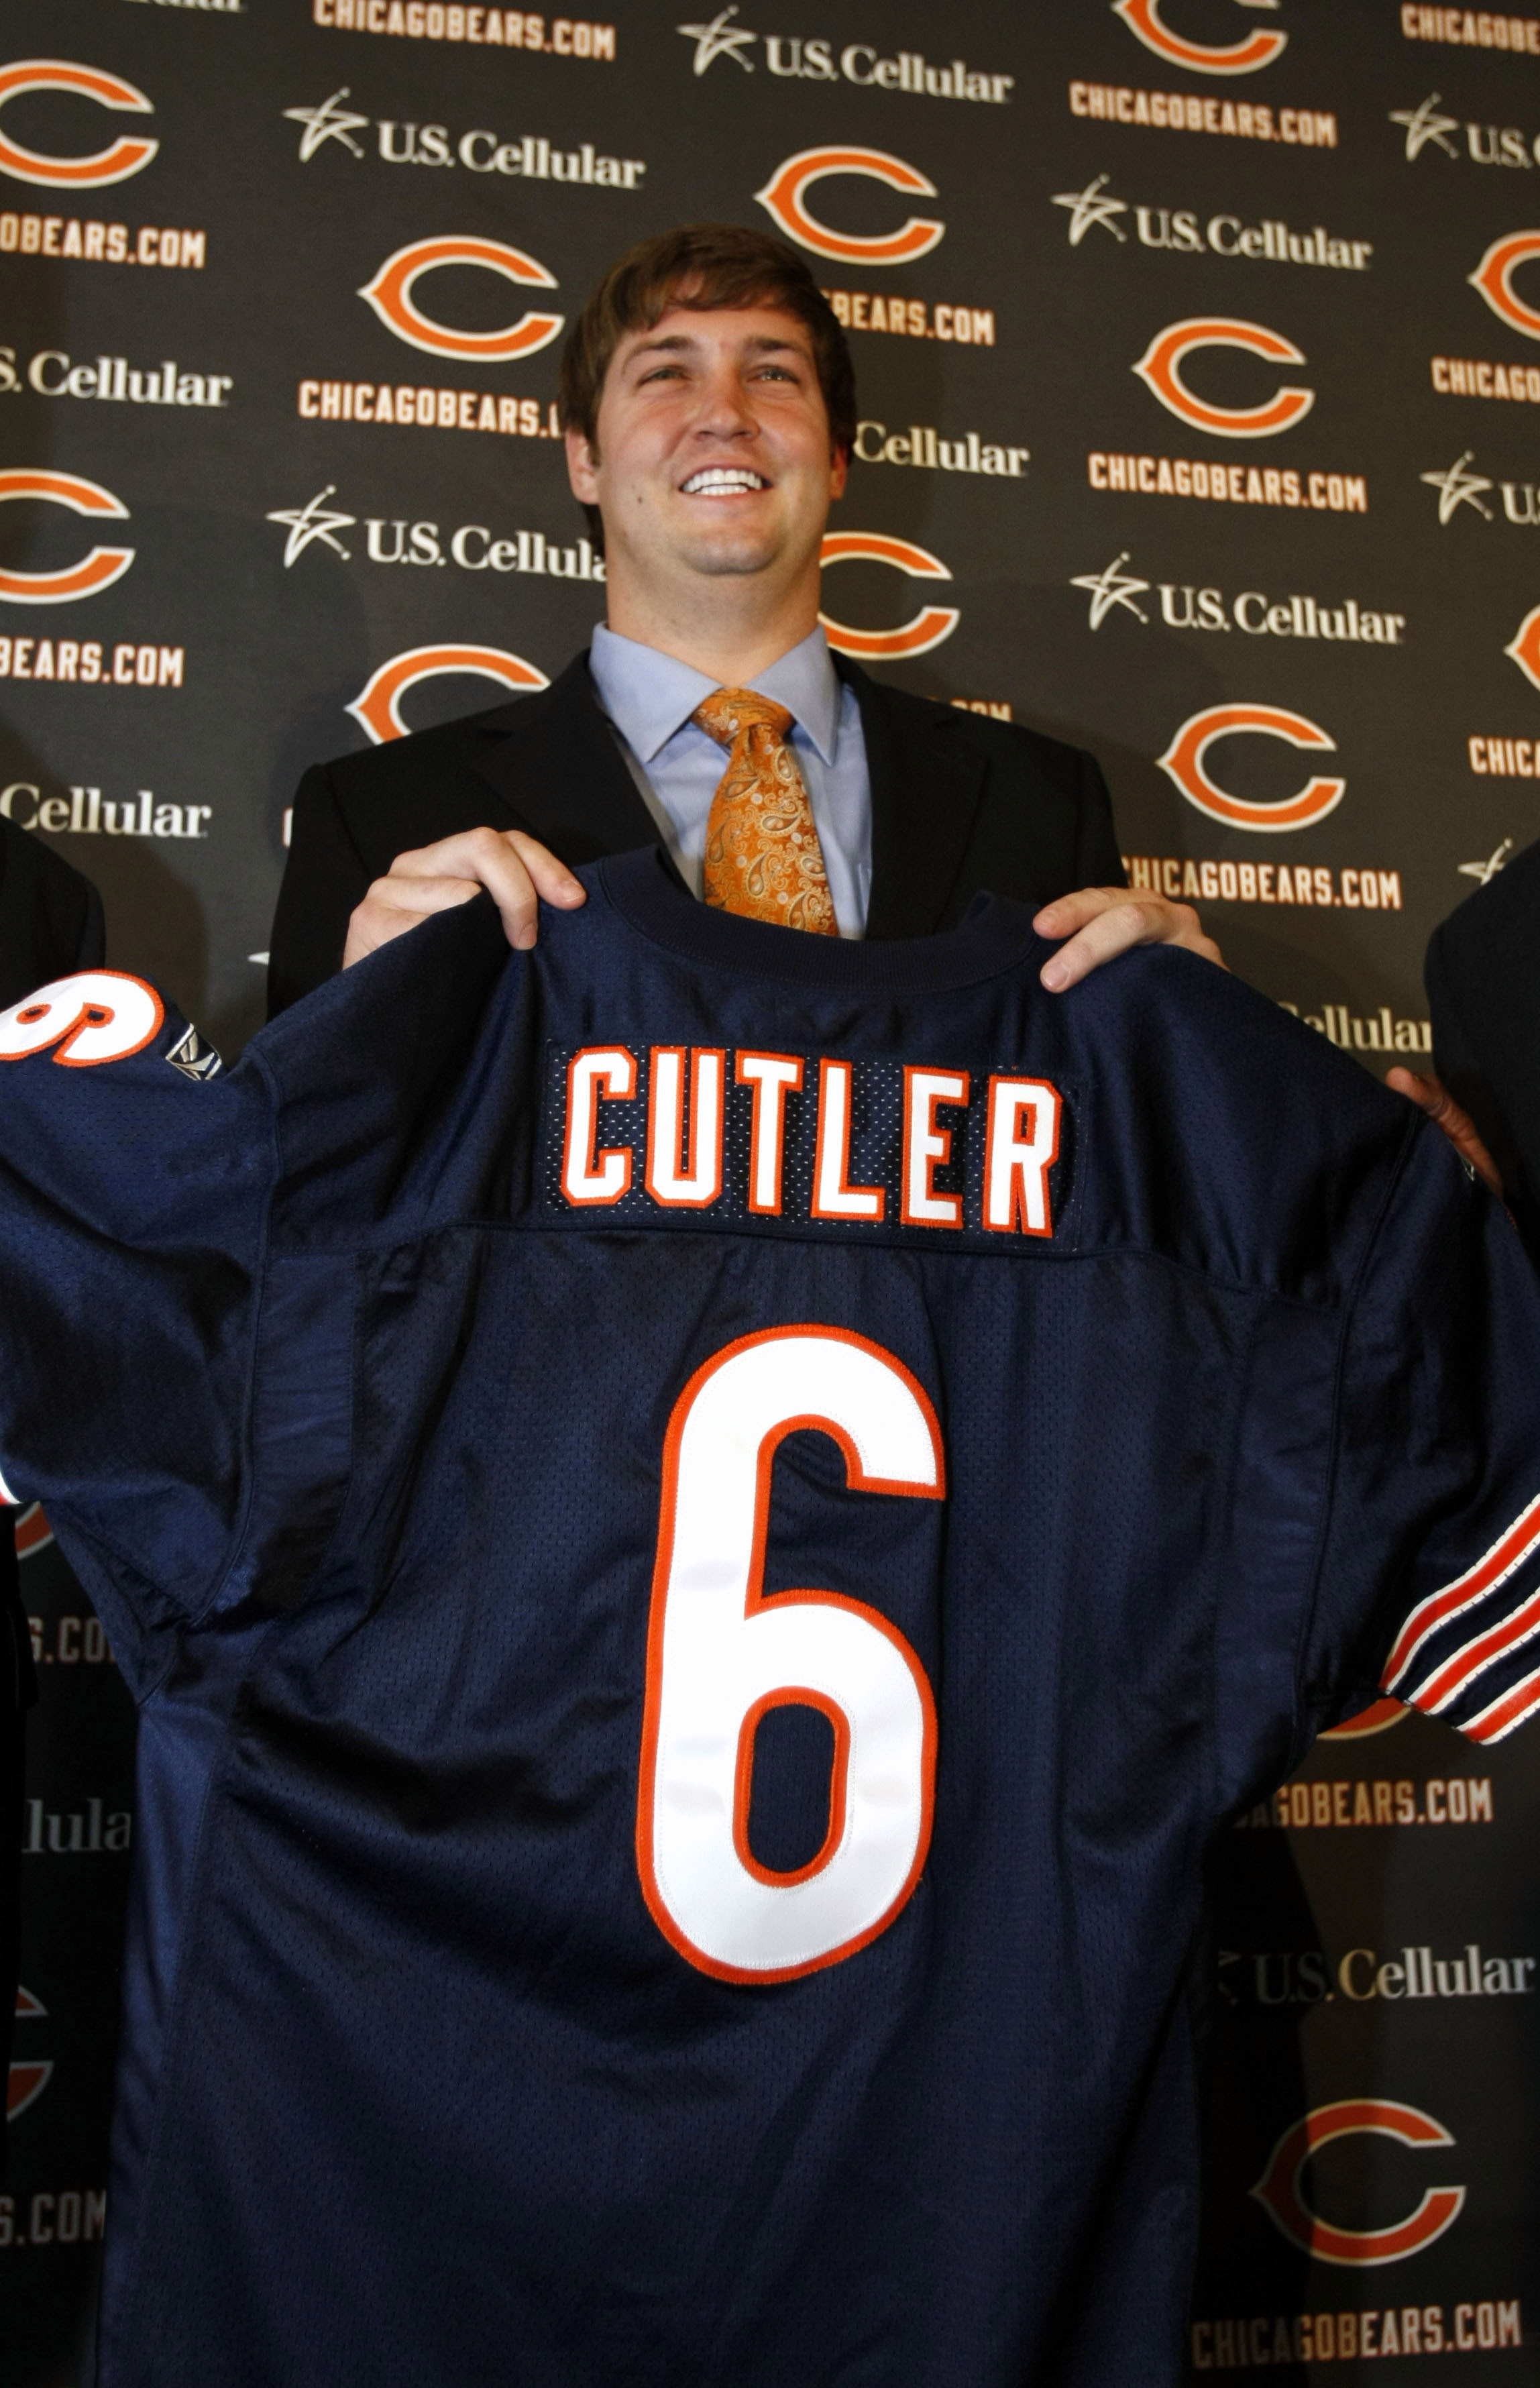 Jay Cutler Released From Bears, 'Will Leave Chicago With Great Memories'